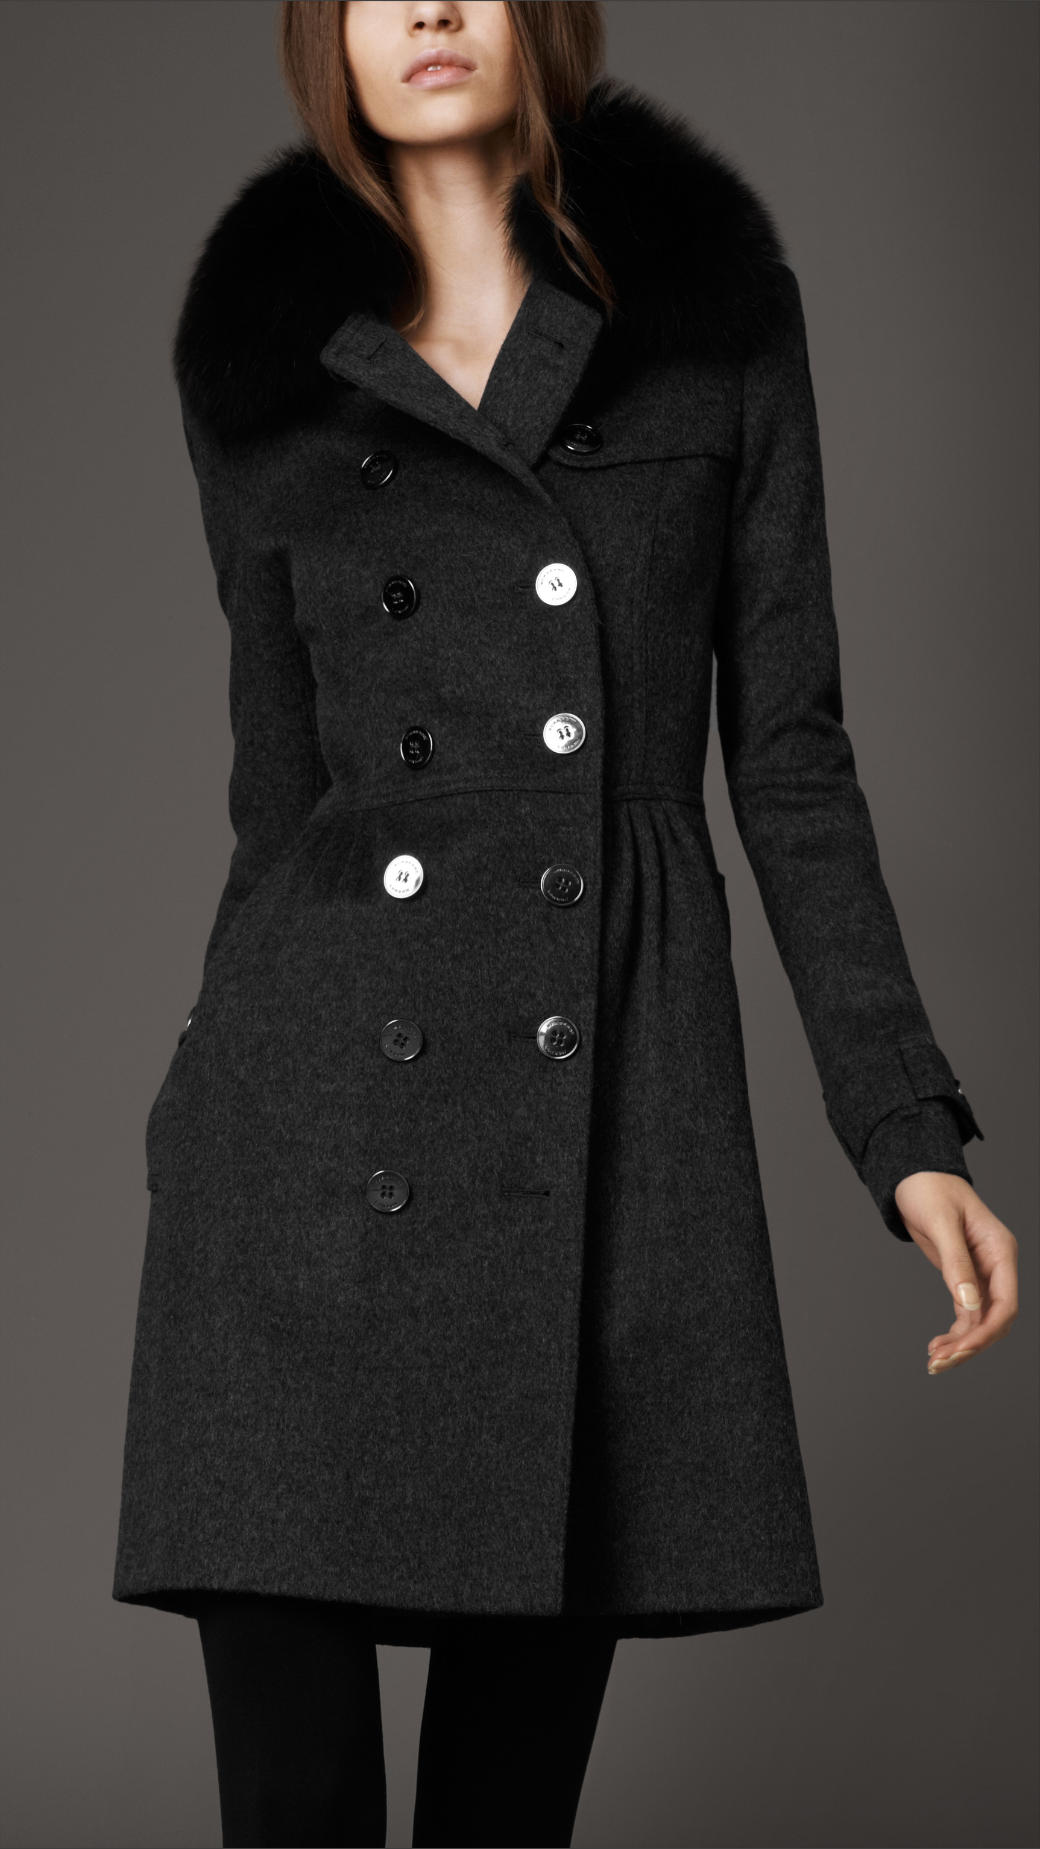 Burberry Fur Collar Trench Coat in Dark Charcoal mélange (Gray) - Lyst